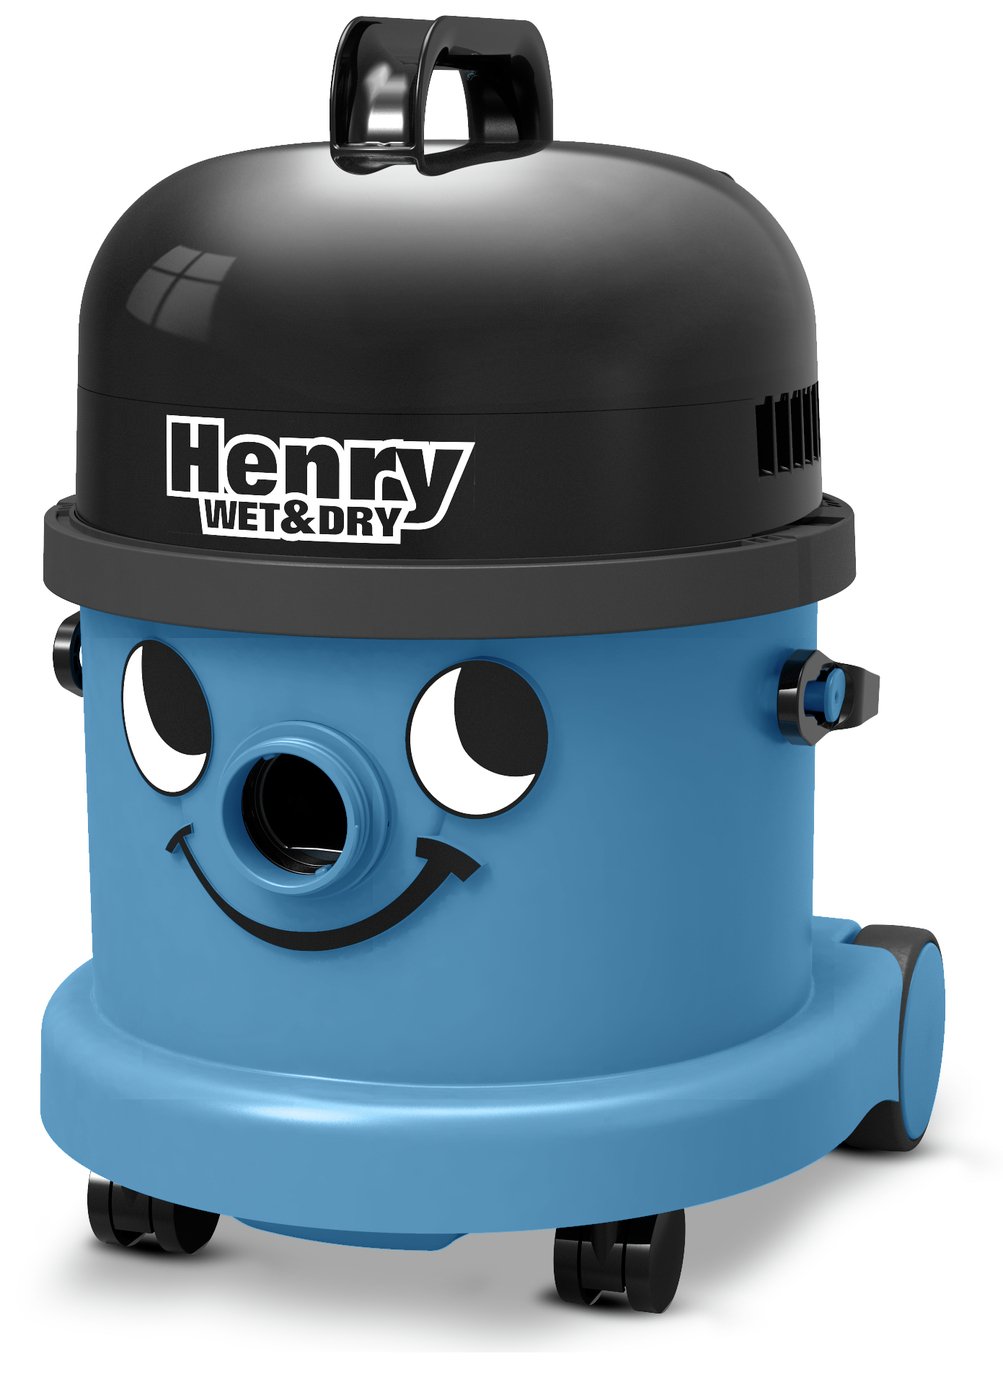 Henry Wet & Dry Cylinder Vacuum Cleaner HWD 370 Review